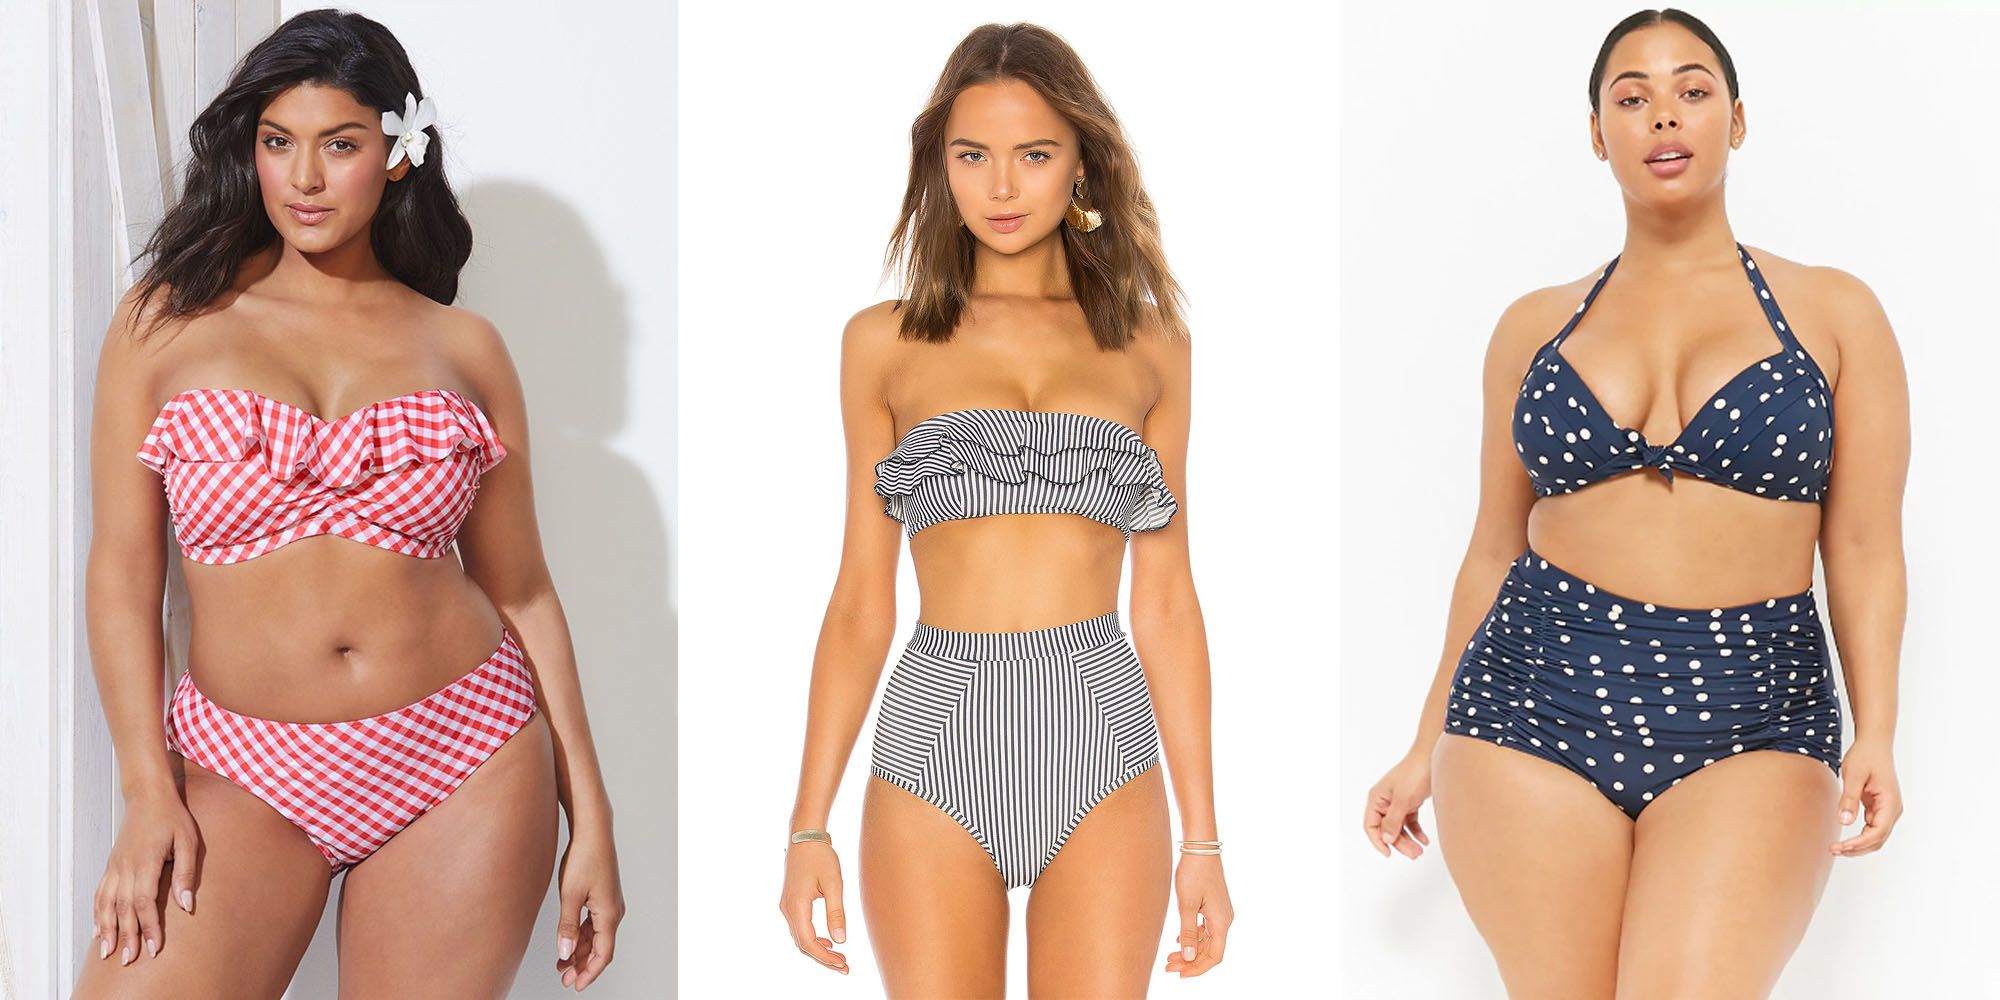 16 Retro Bikinis and One-Pieces That Will Make You Feel Like a Vintage  Queen - Retro Swimwear